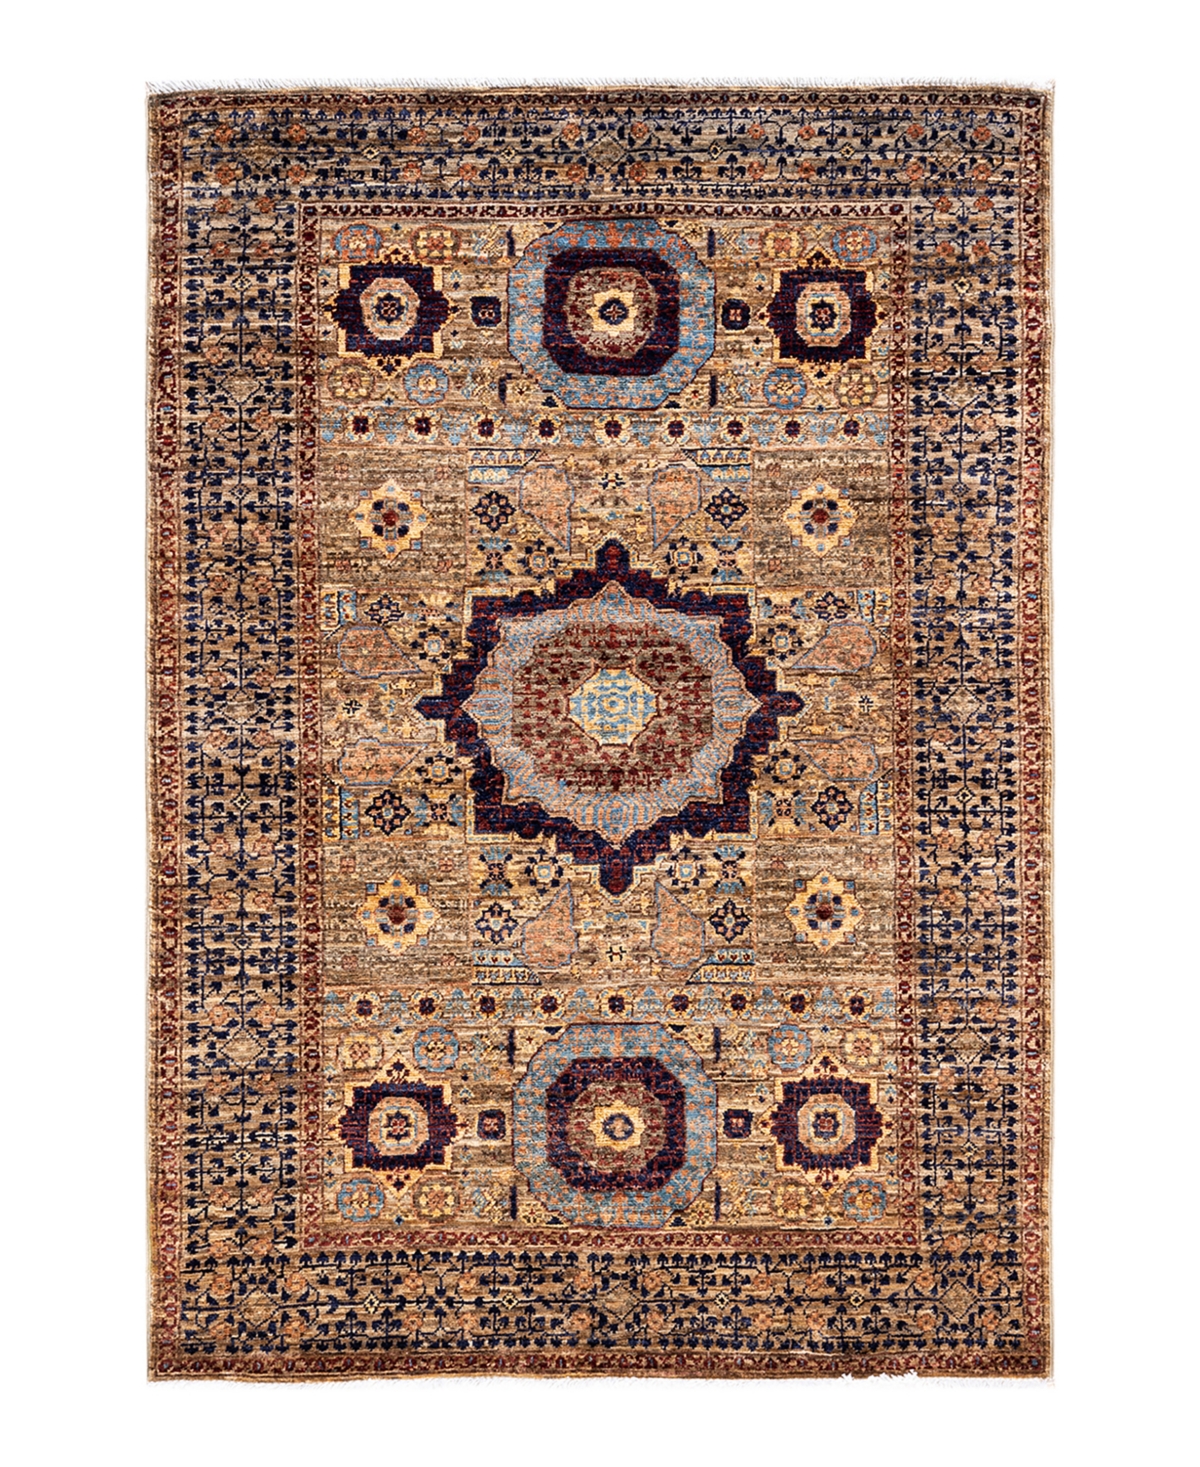 Adorn Hand Woven Rugs Oushak M1982 4' X 5'10" Area Rug In Ivory